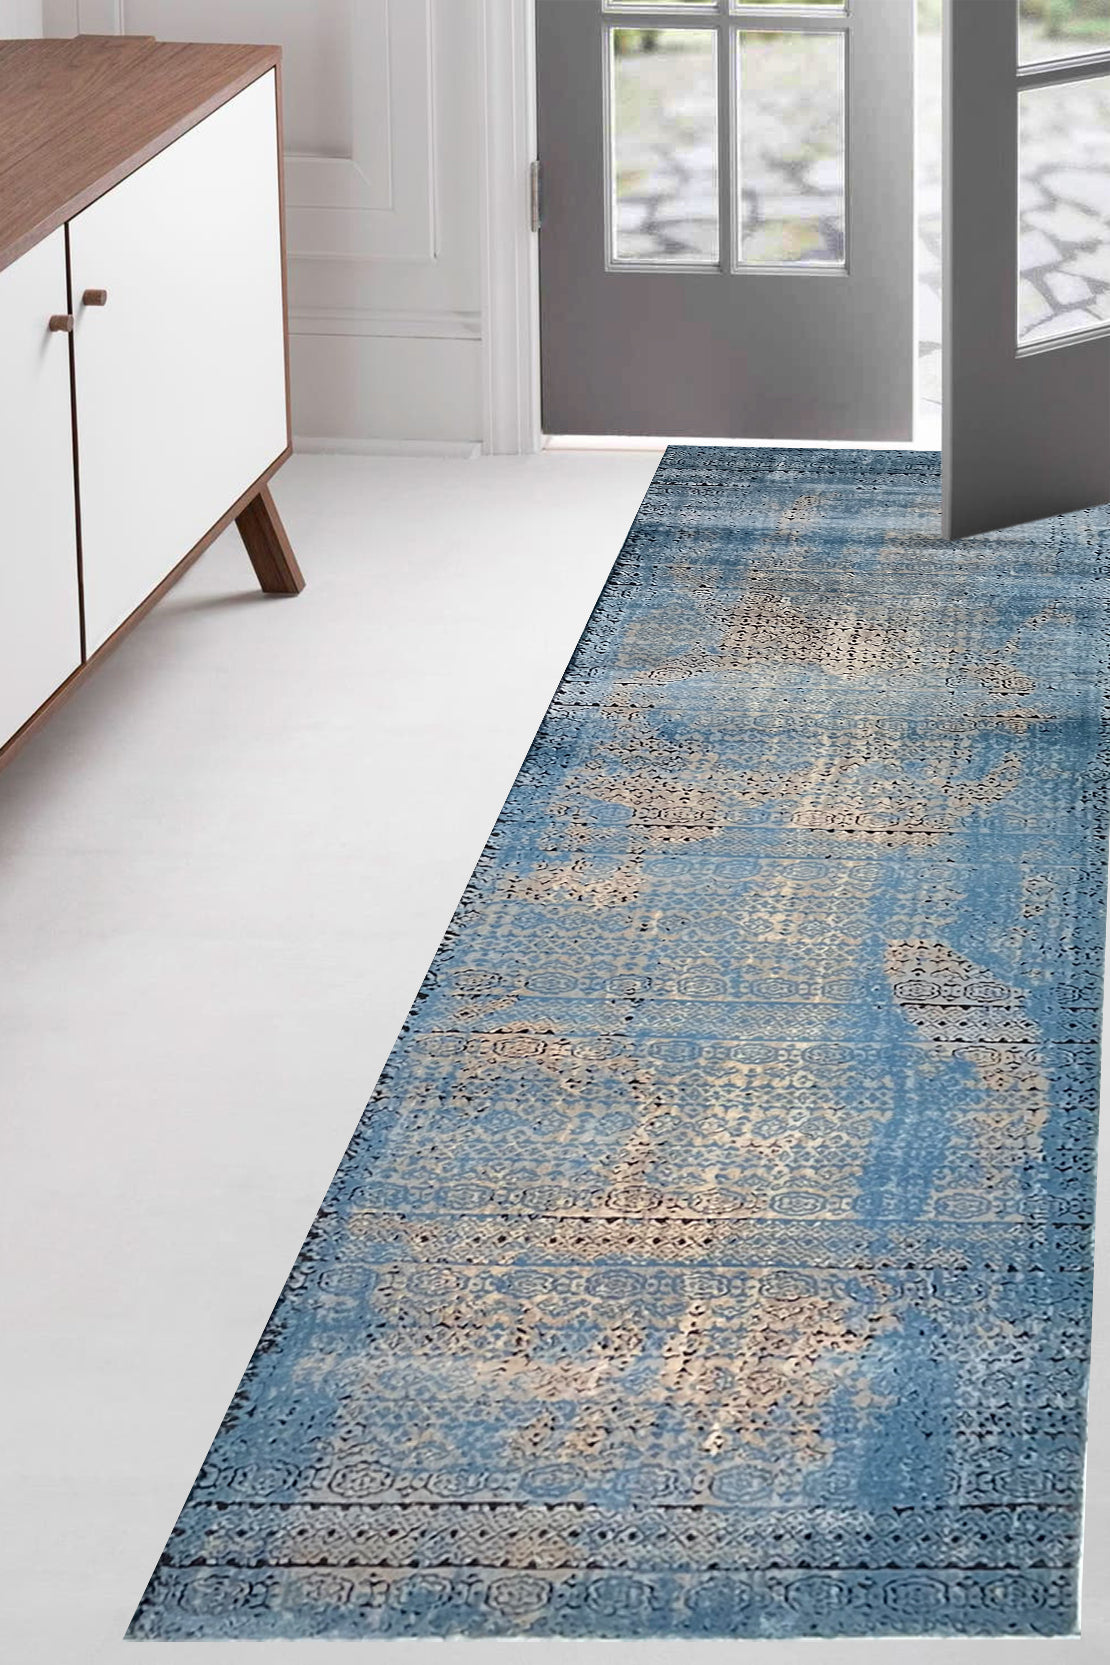 Turkish Modern Festival WD Rug - 2.2 x 7.6 FT - Blue - Superior Comfort, Modern & runners Style Accent Rugs